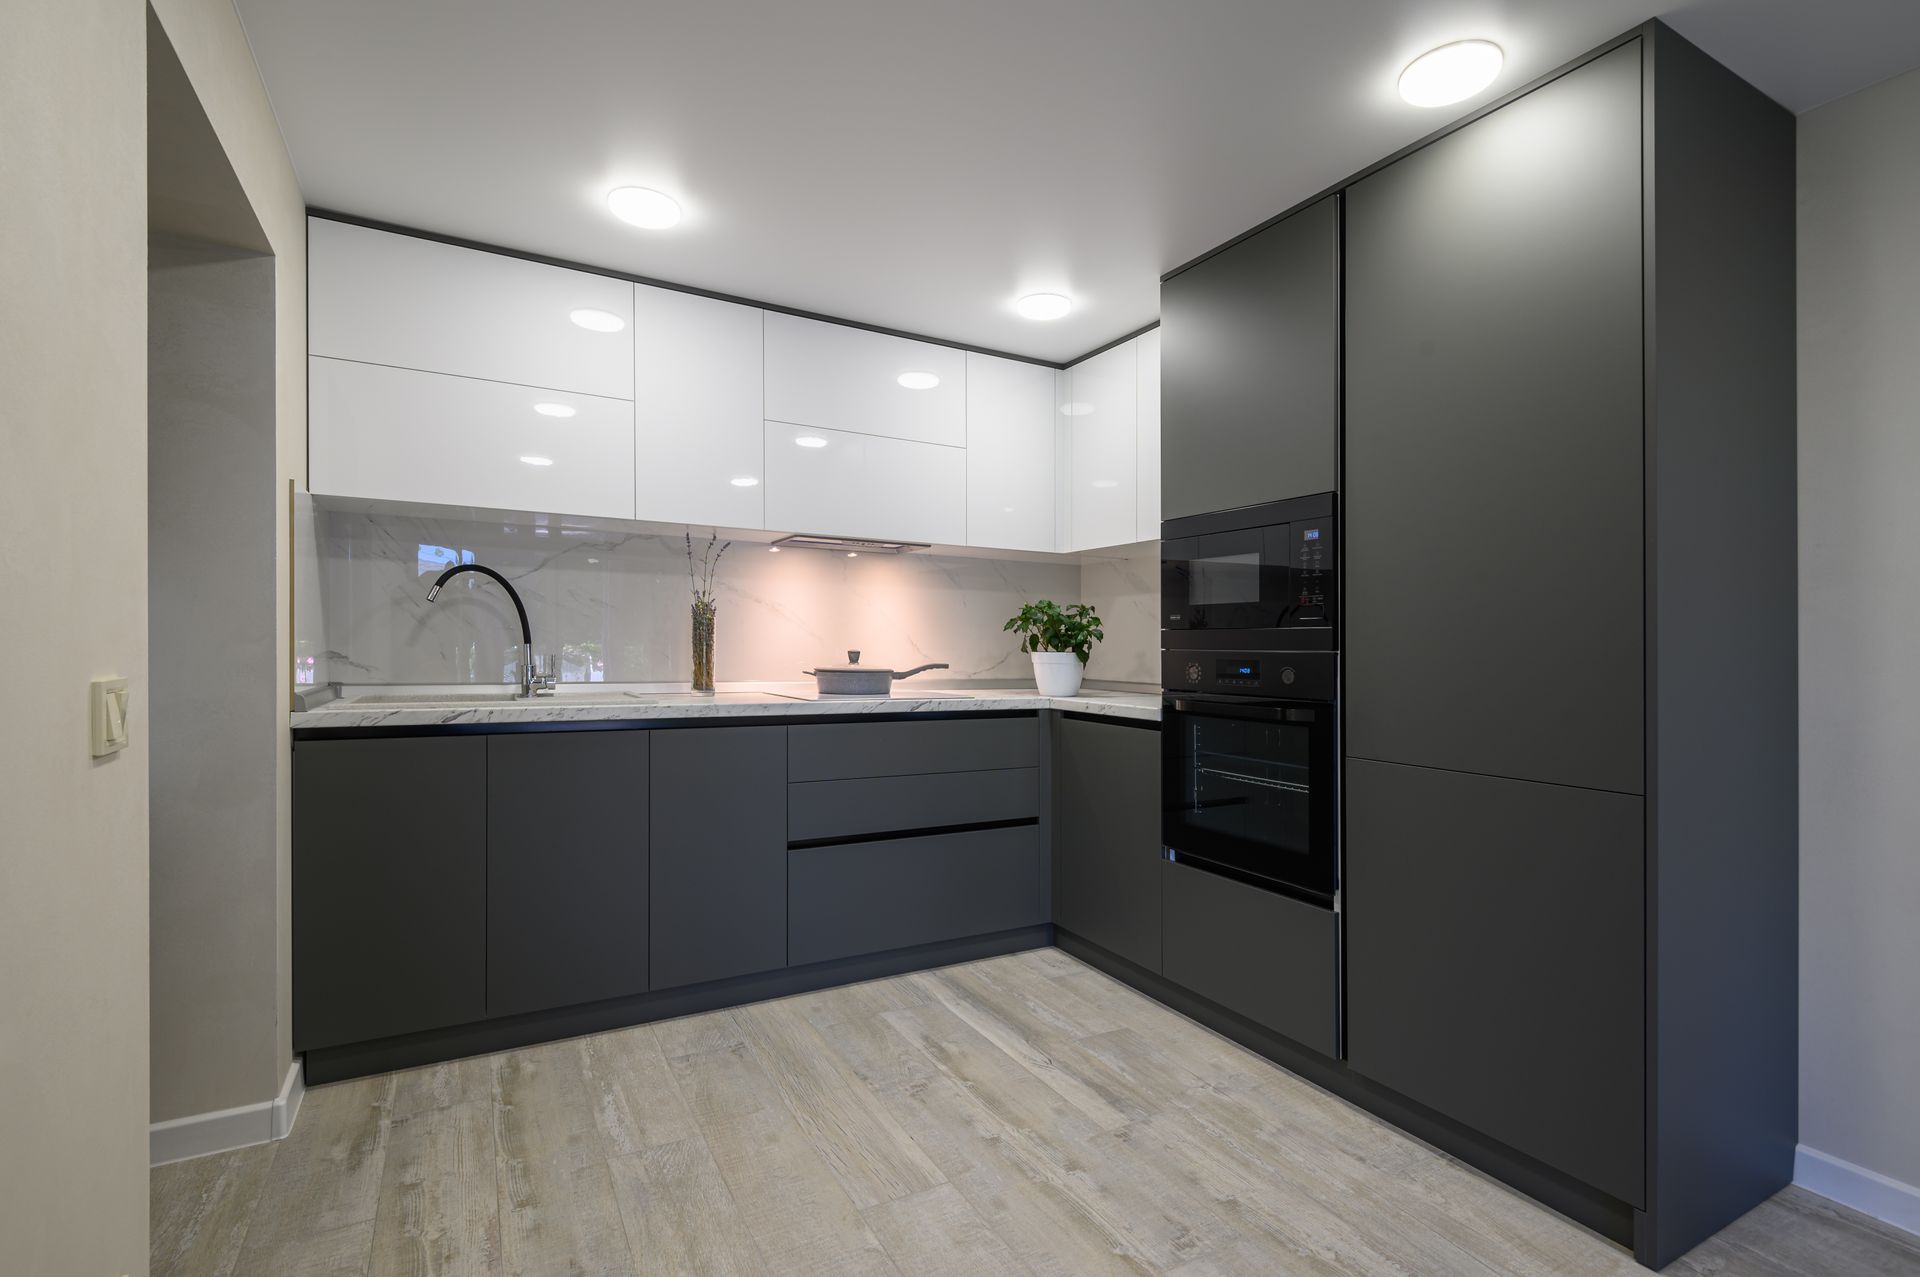 a modern kitchen with gray and white cabinets and a wooden floor .